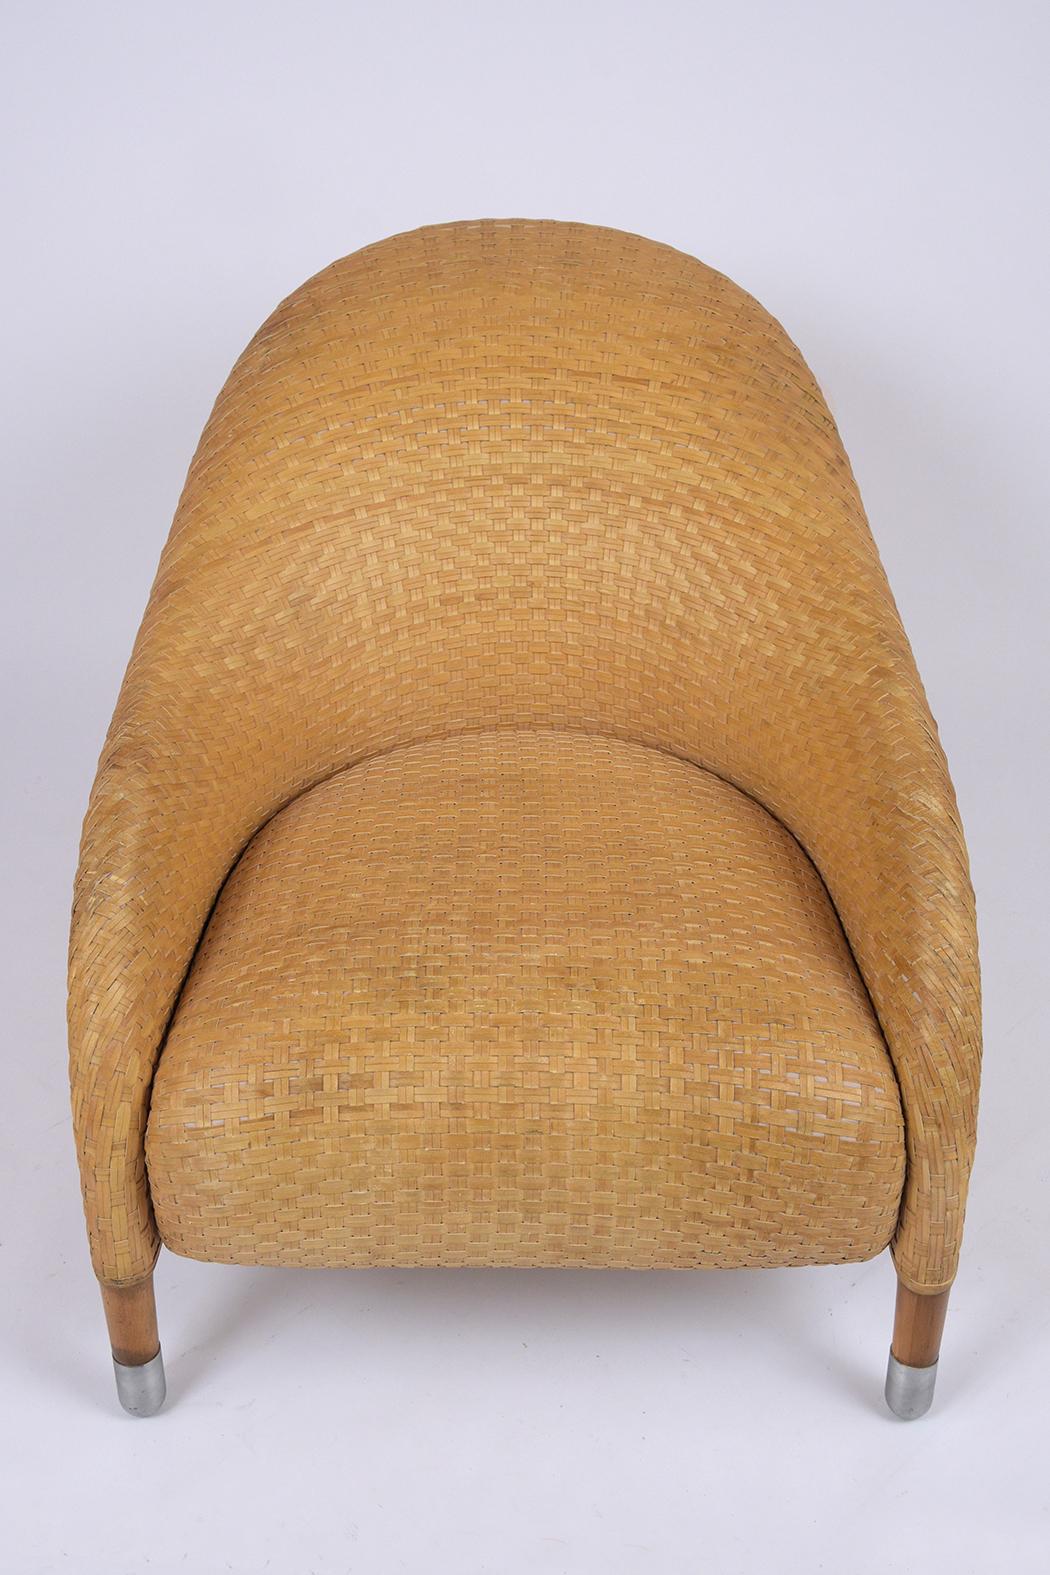 American Pair of Woven Leather Chairs